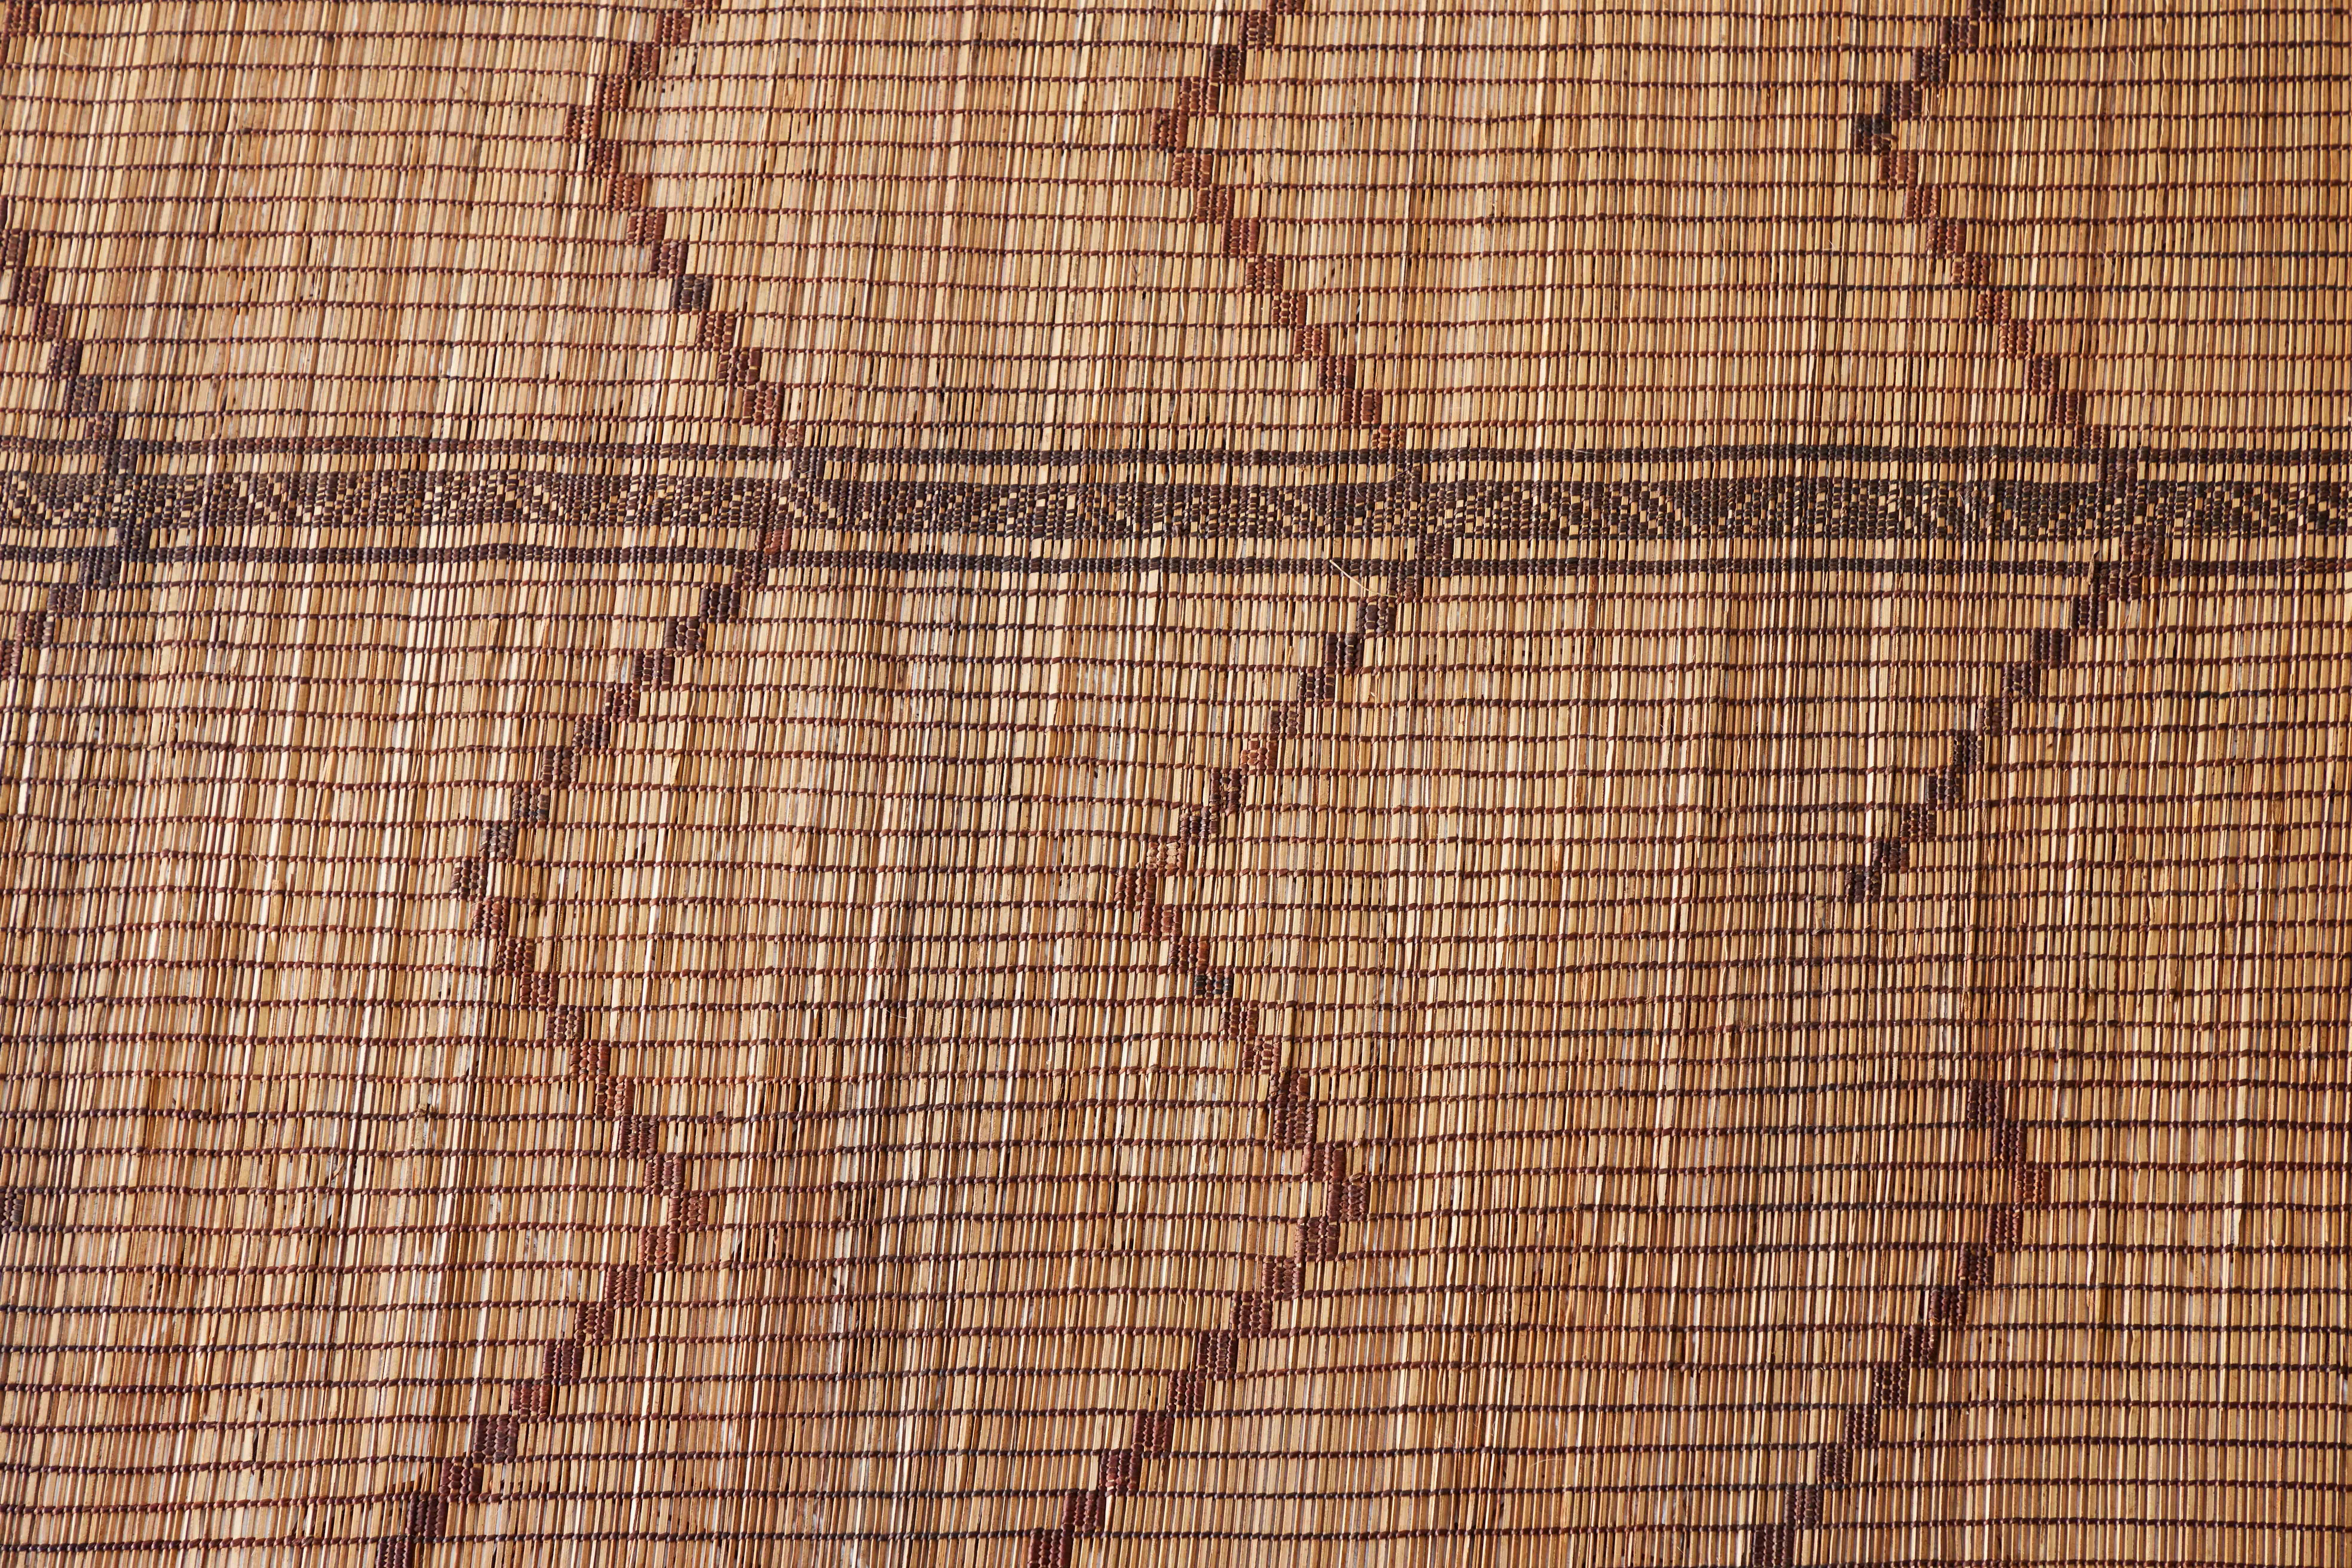 A very unique Tuareg will elevate any design space with its tribal design and striking texture. This piece is handwoven by the Tuaregs, the oldest nomadic groups of the Saharan trade routes located in Northern Africa. These mats are handwoven by